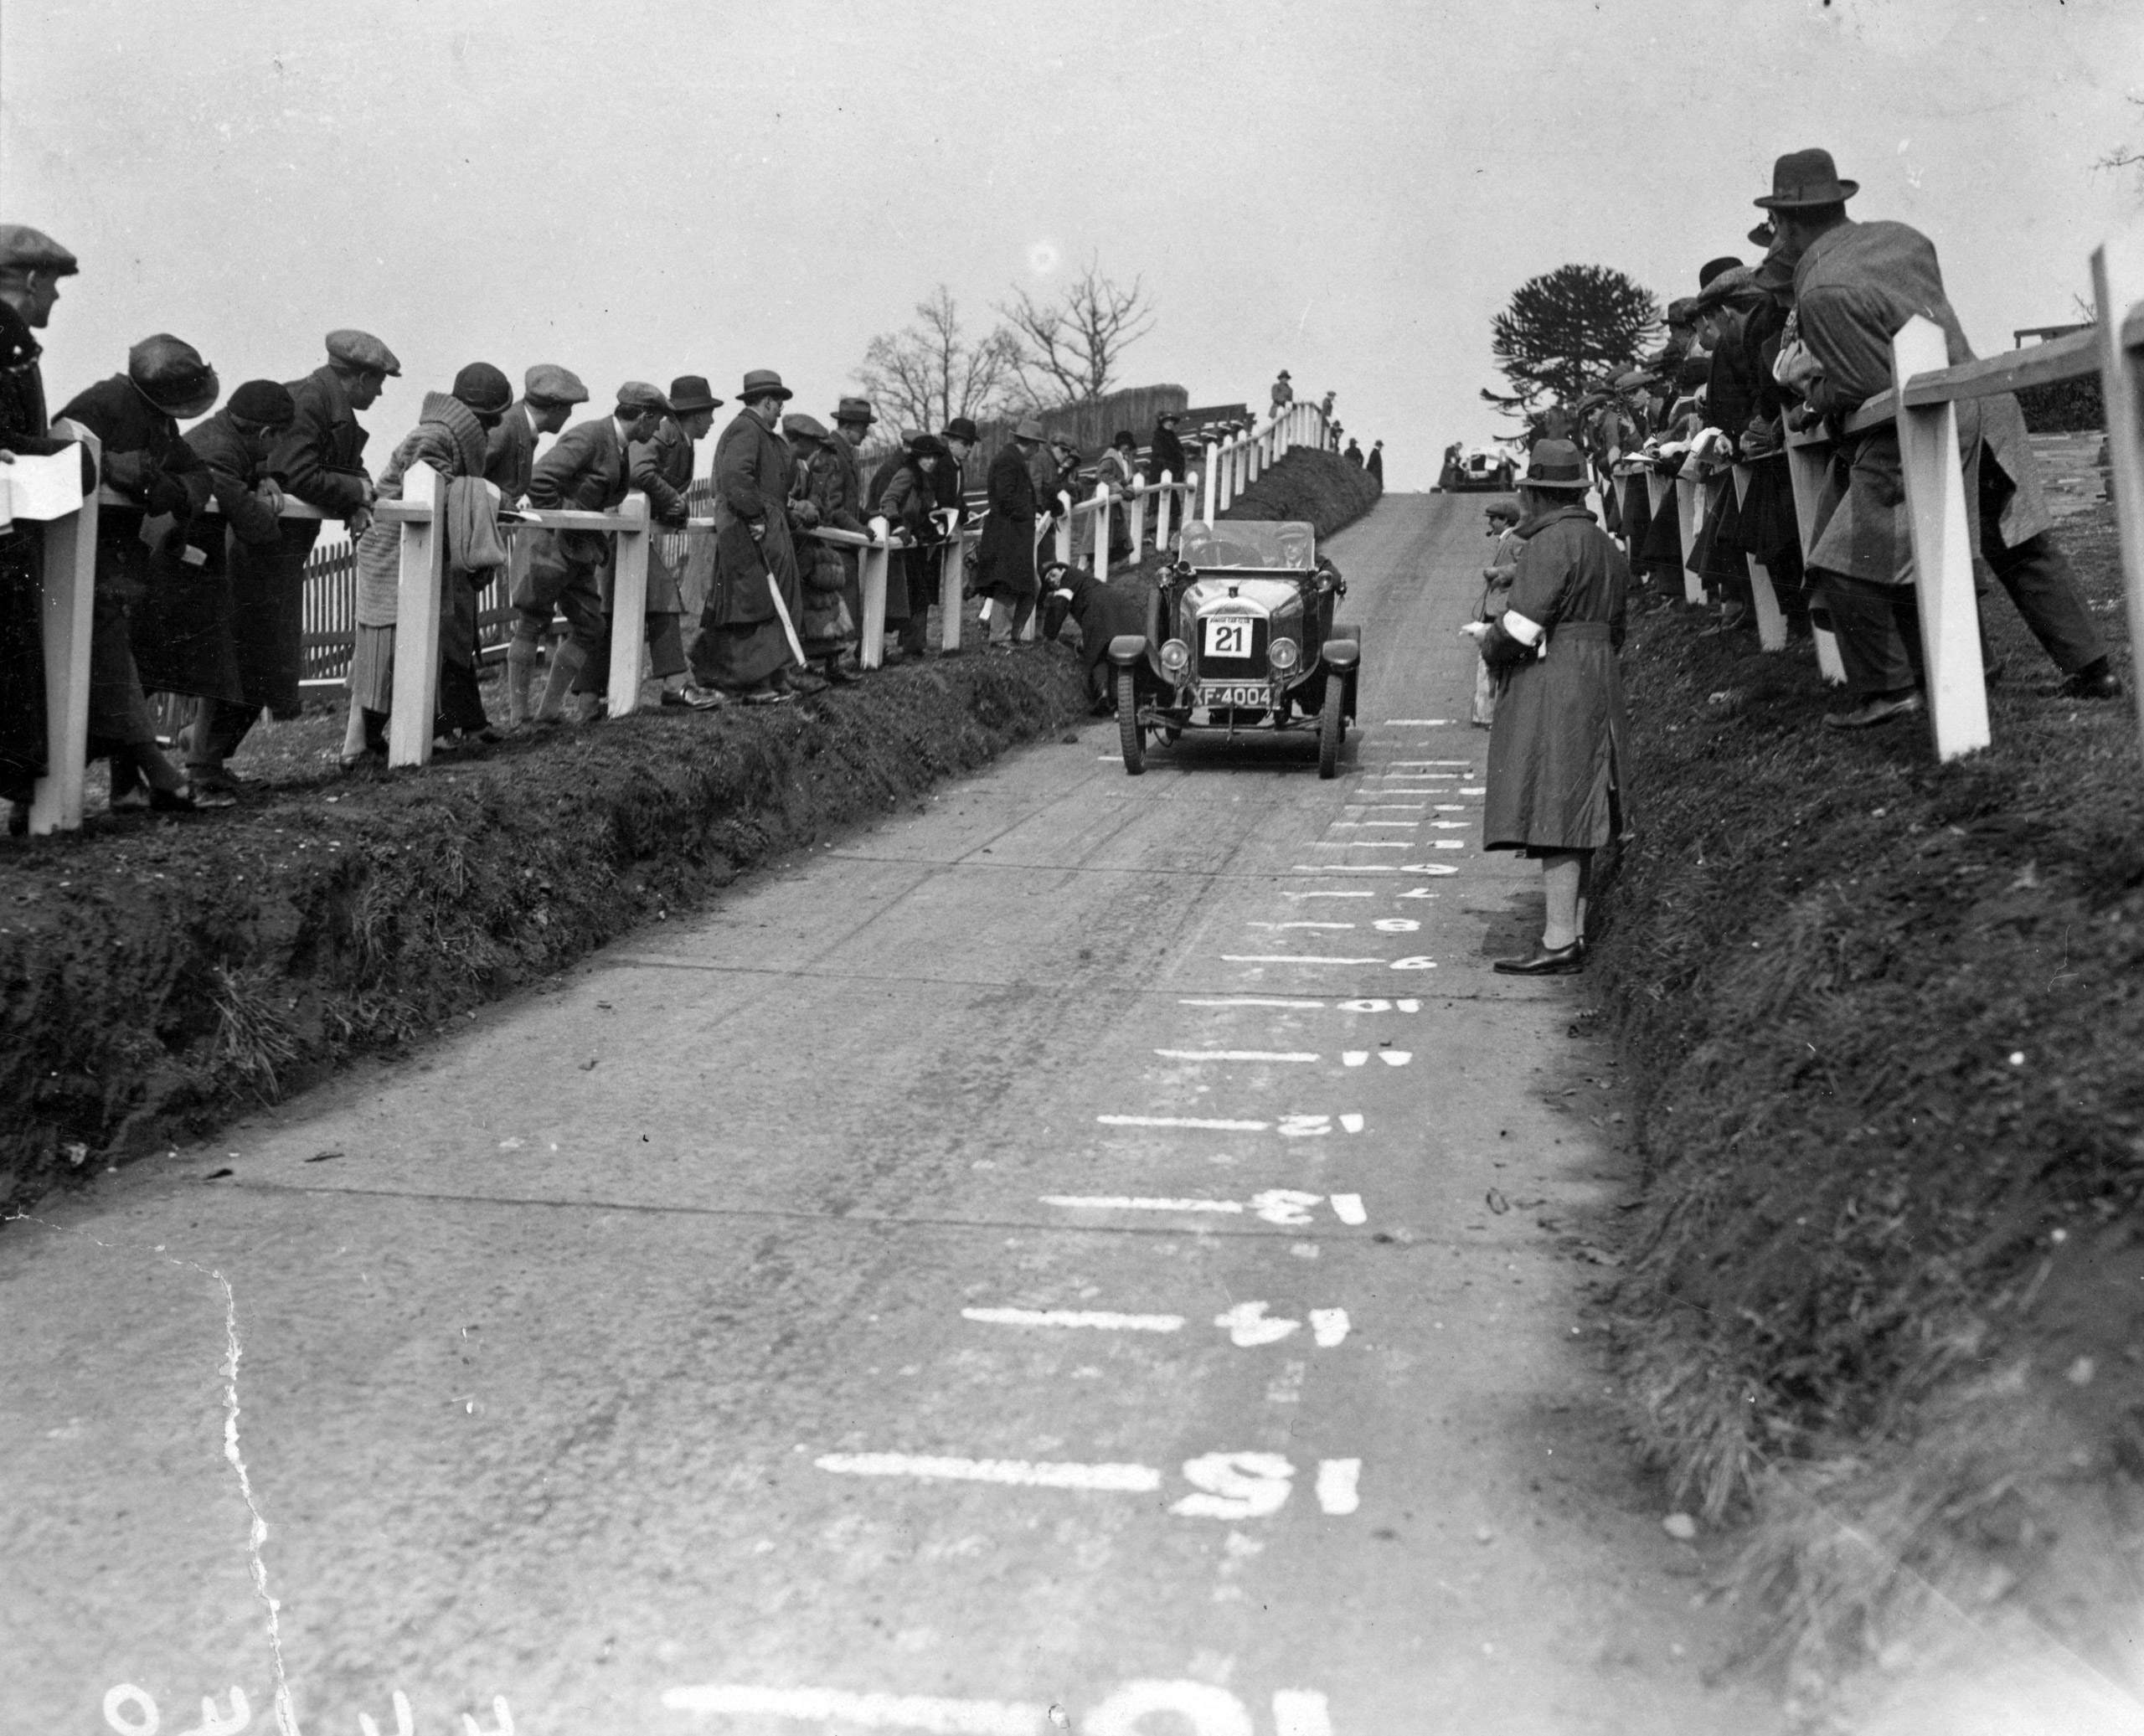 Miss Nicoll doing a brake test at Brooklands, Surrey, England. March 1923.